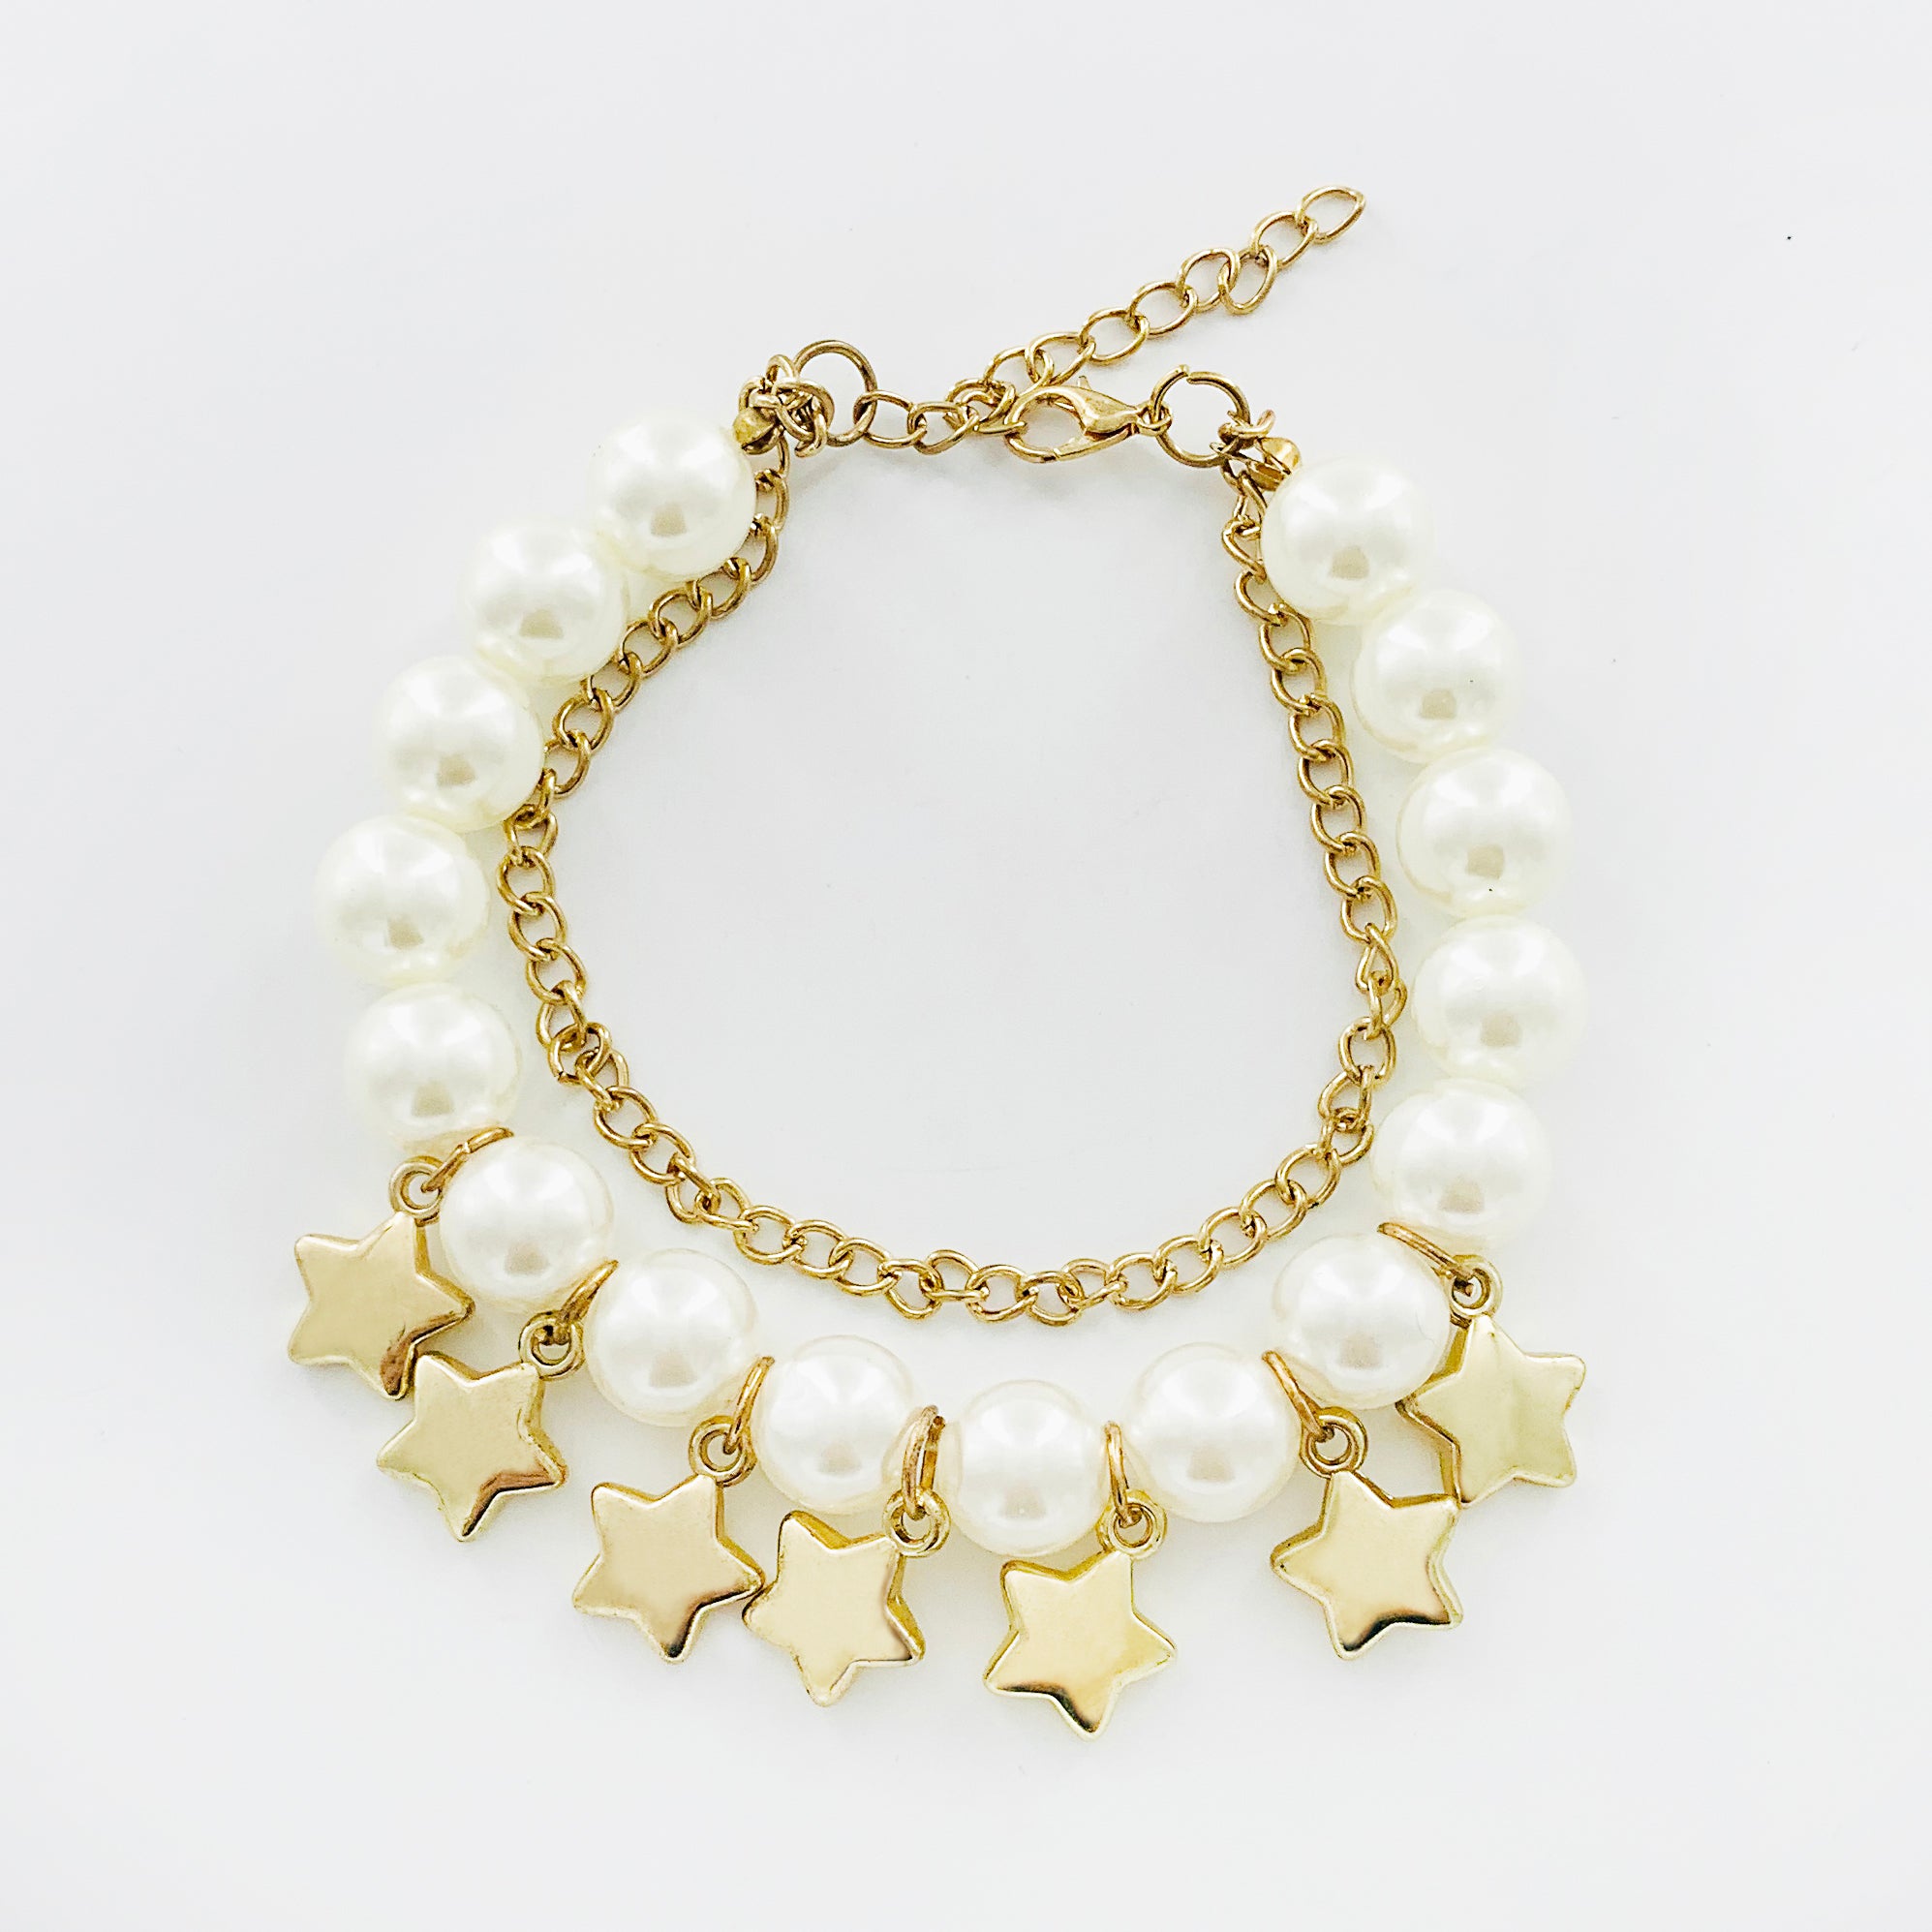 Gold and pearl bracelet with star charms